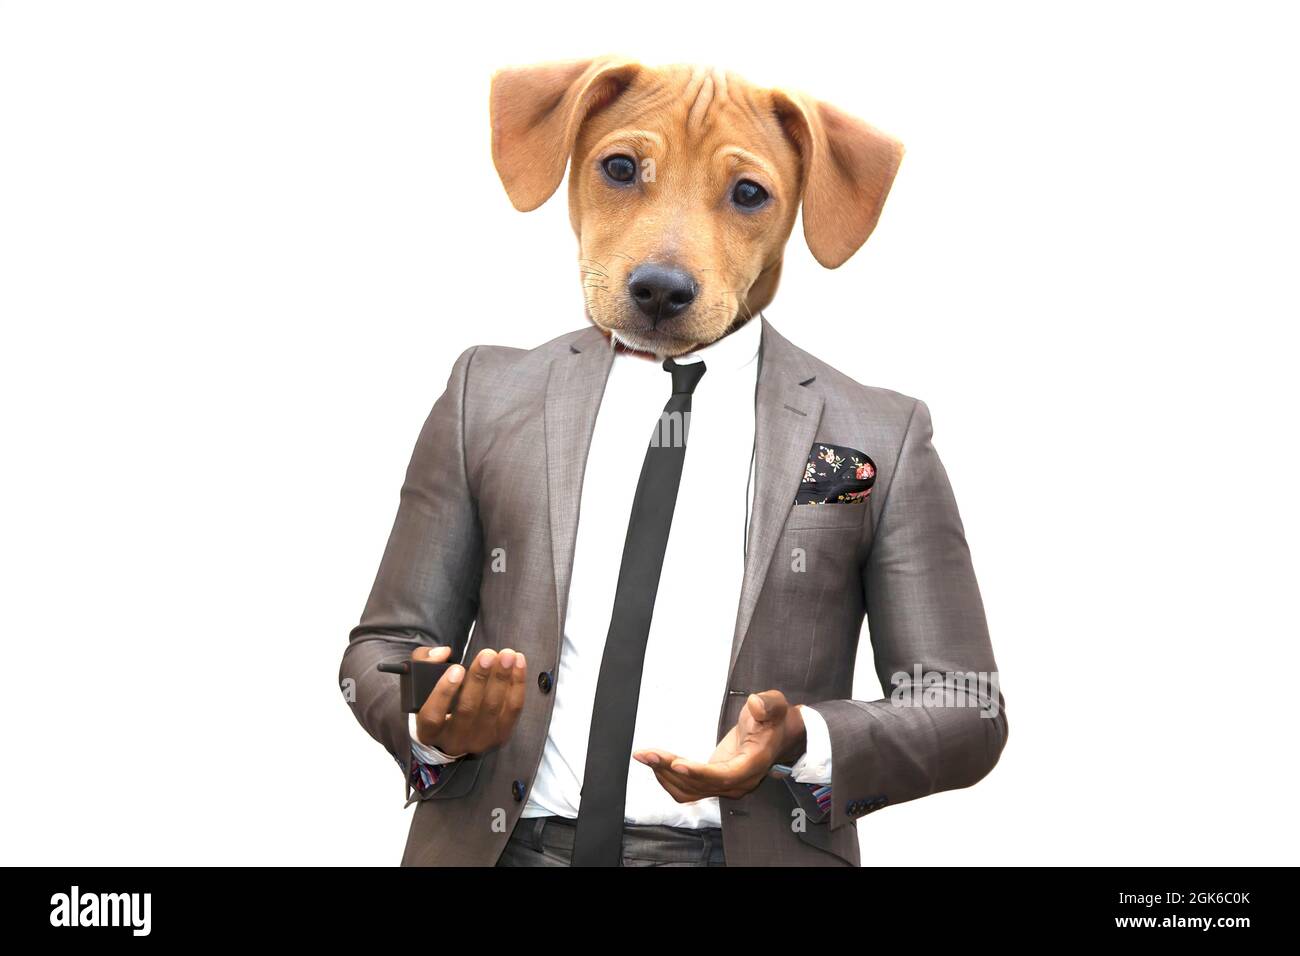 Funny face of a dog in a business suit Stock Photo - Alamy